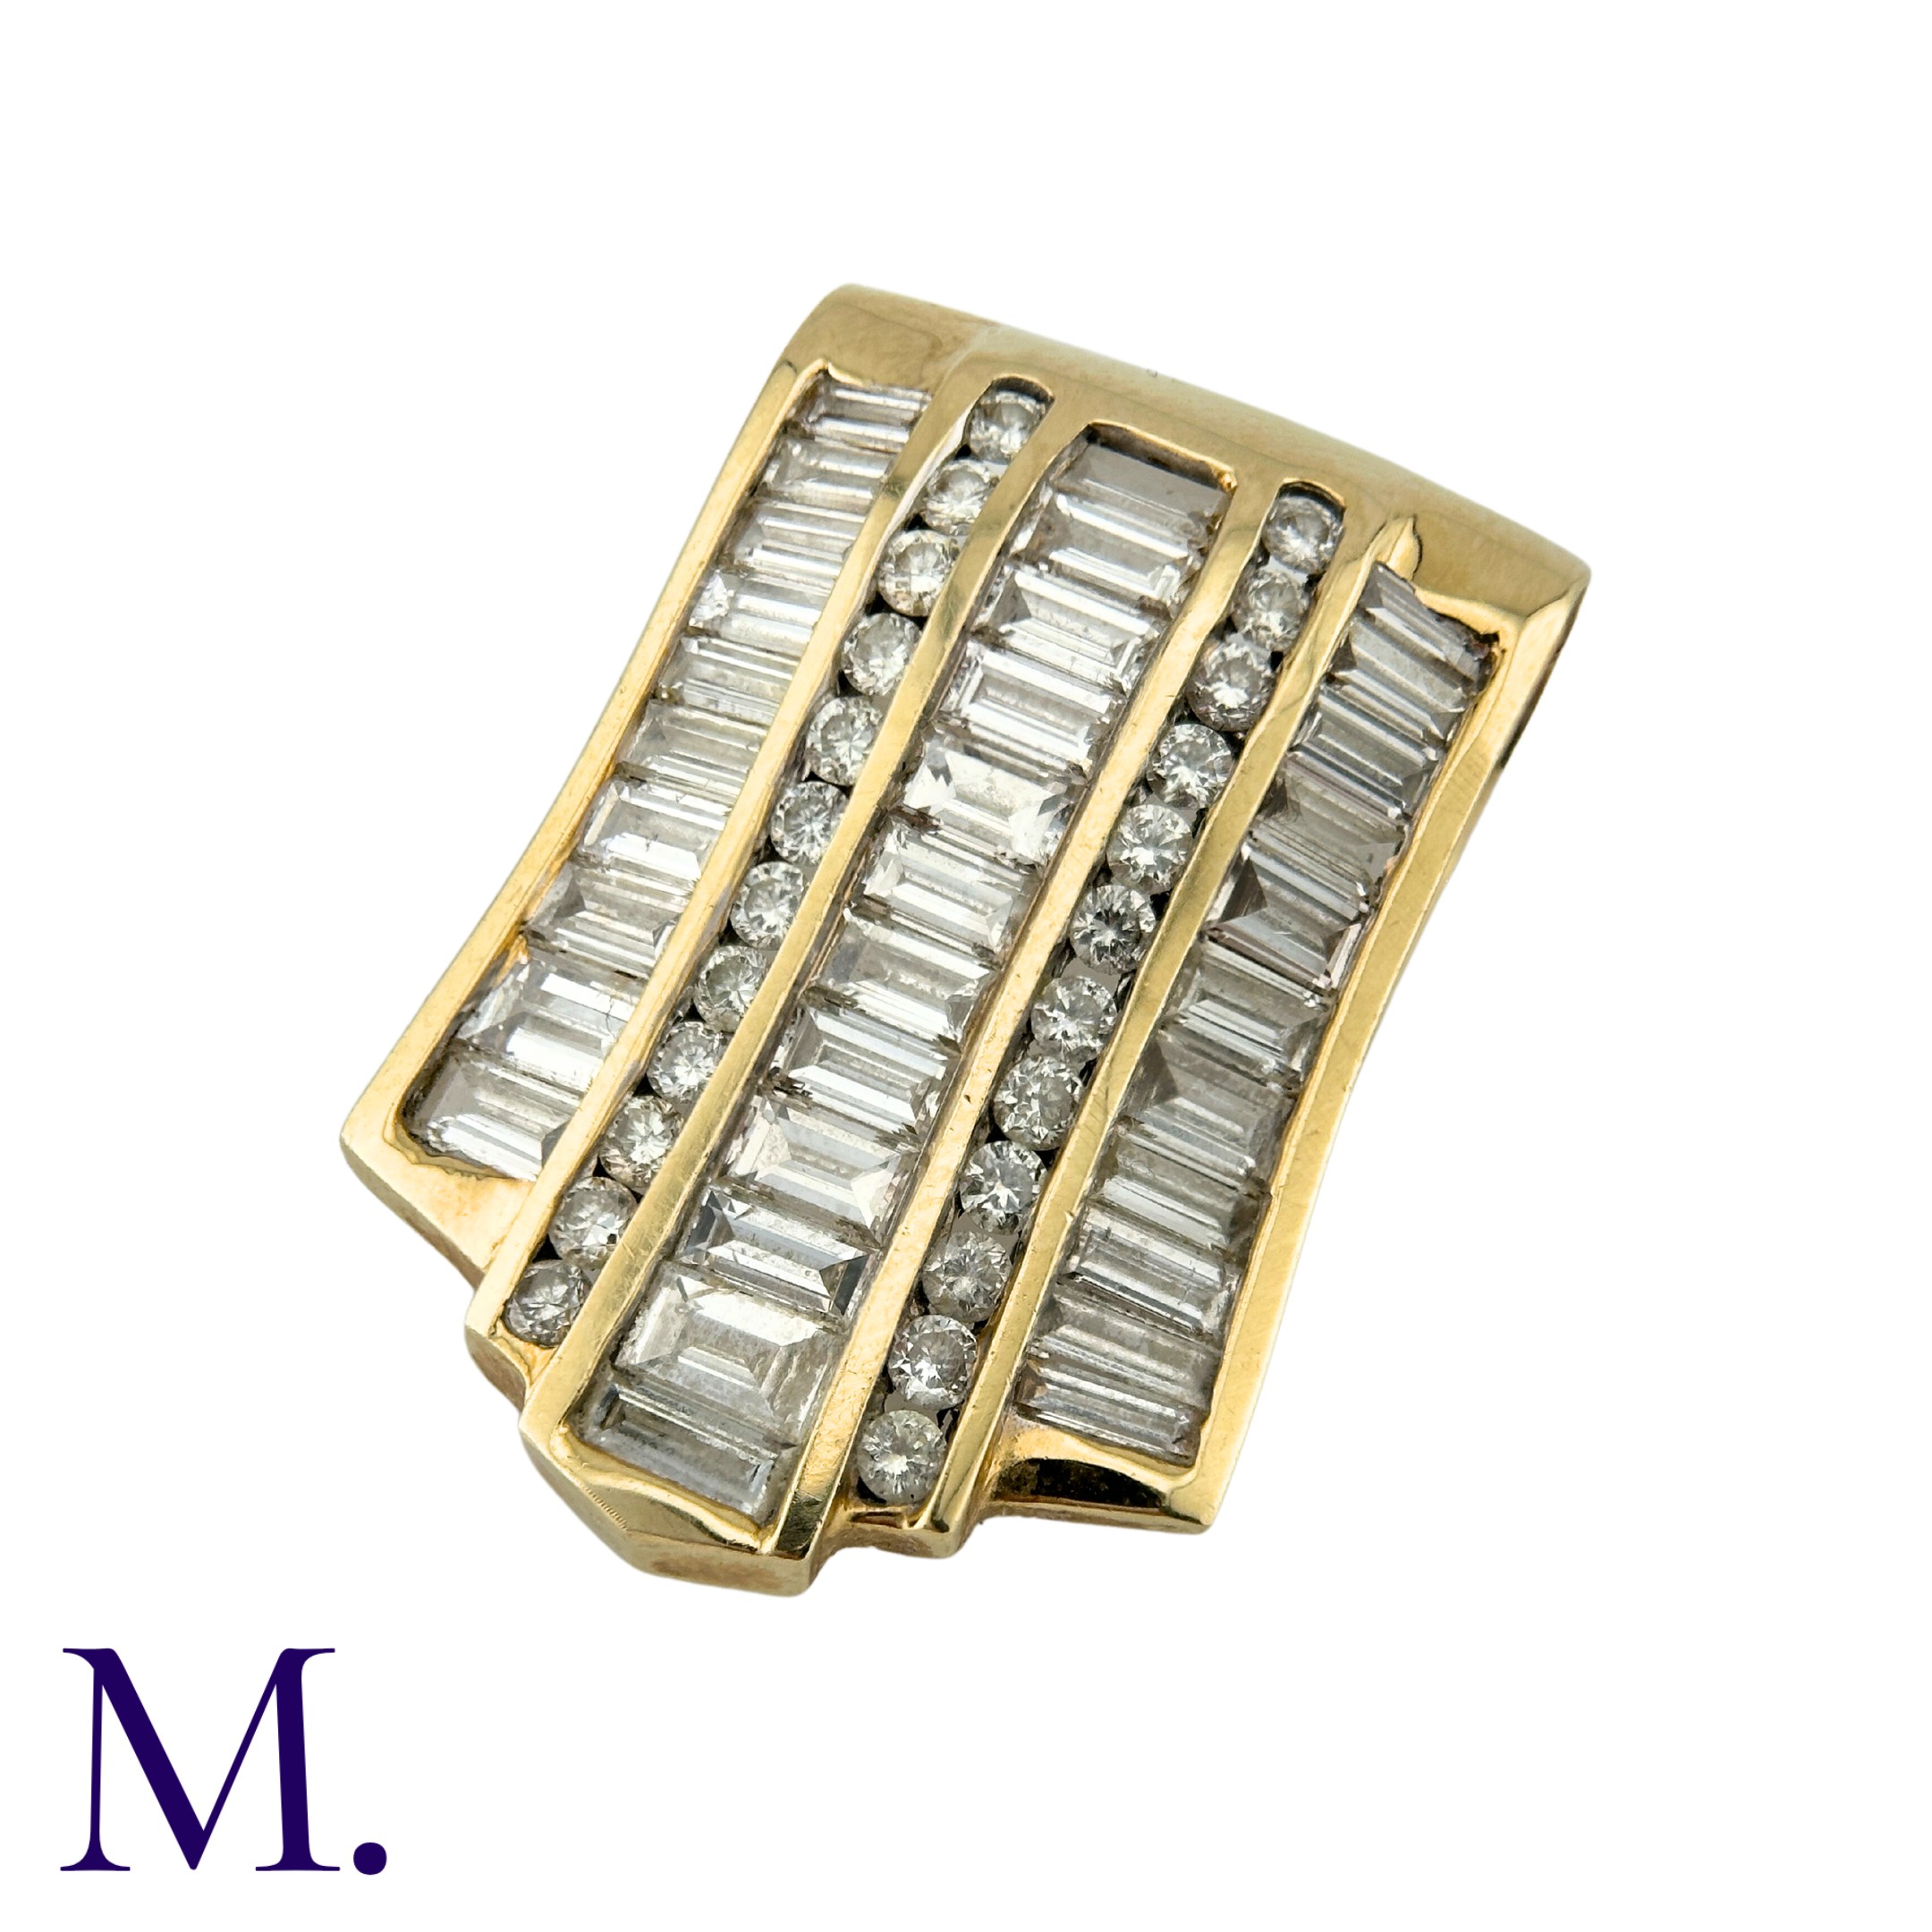 A Diamond Pendant in 14k yellow gold, set with three rows of baguette cut diamonds and two rows of